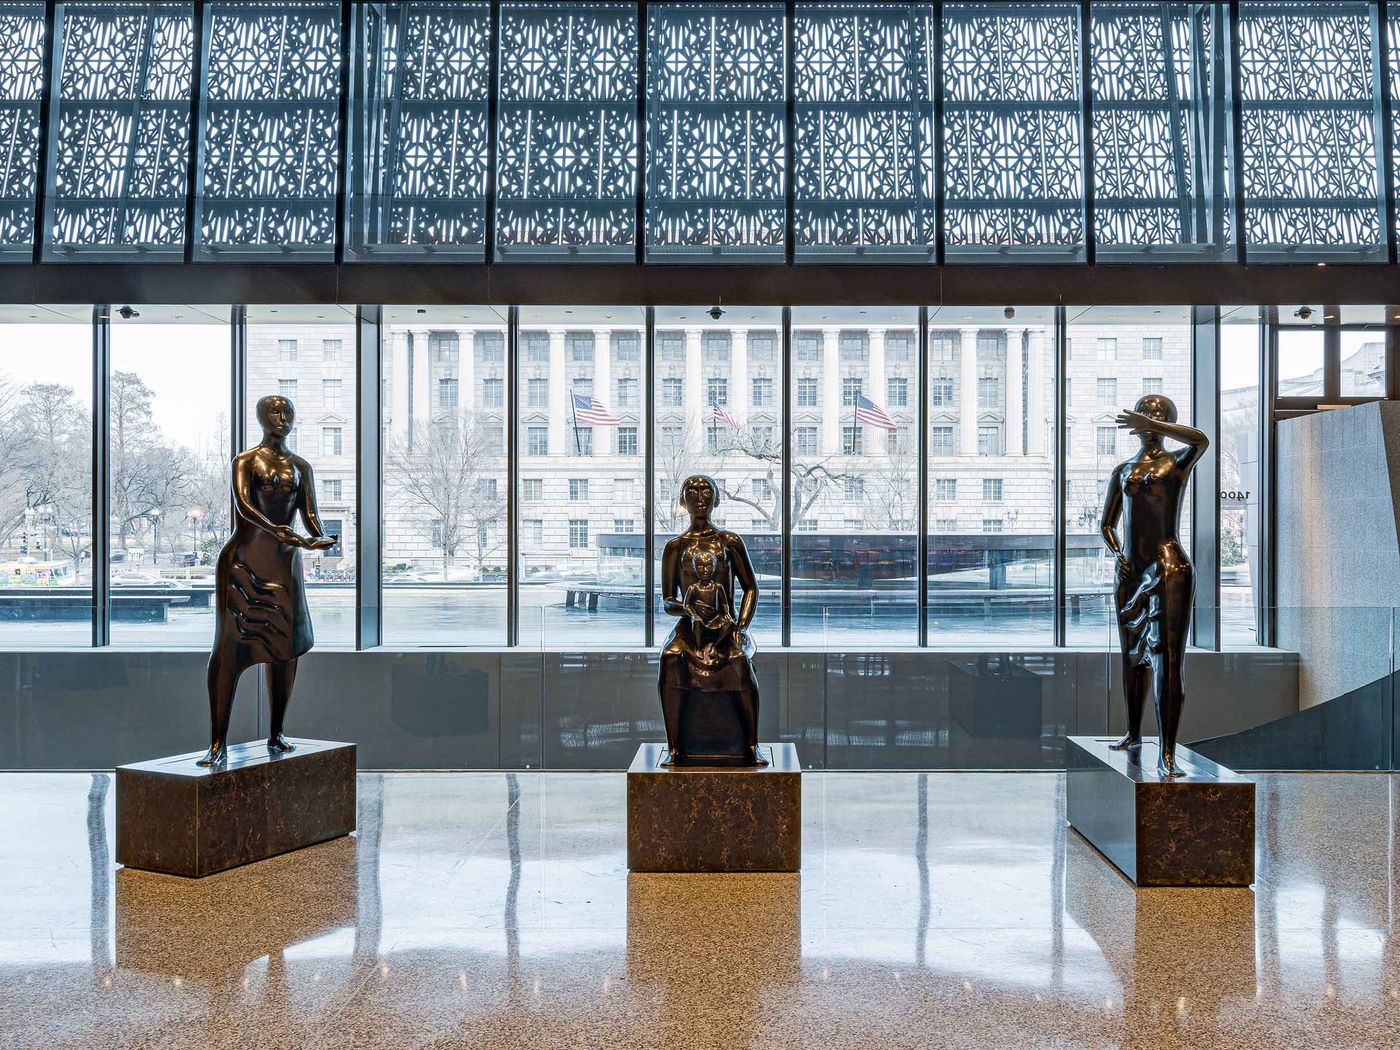 Catlett's sculptures on view at NMAAHC